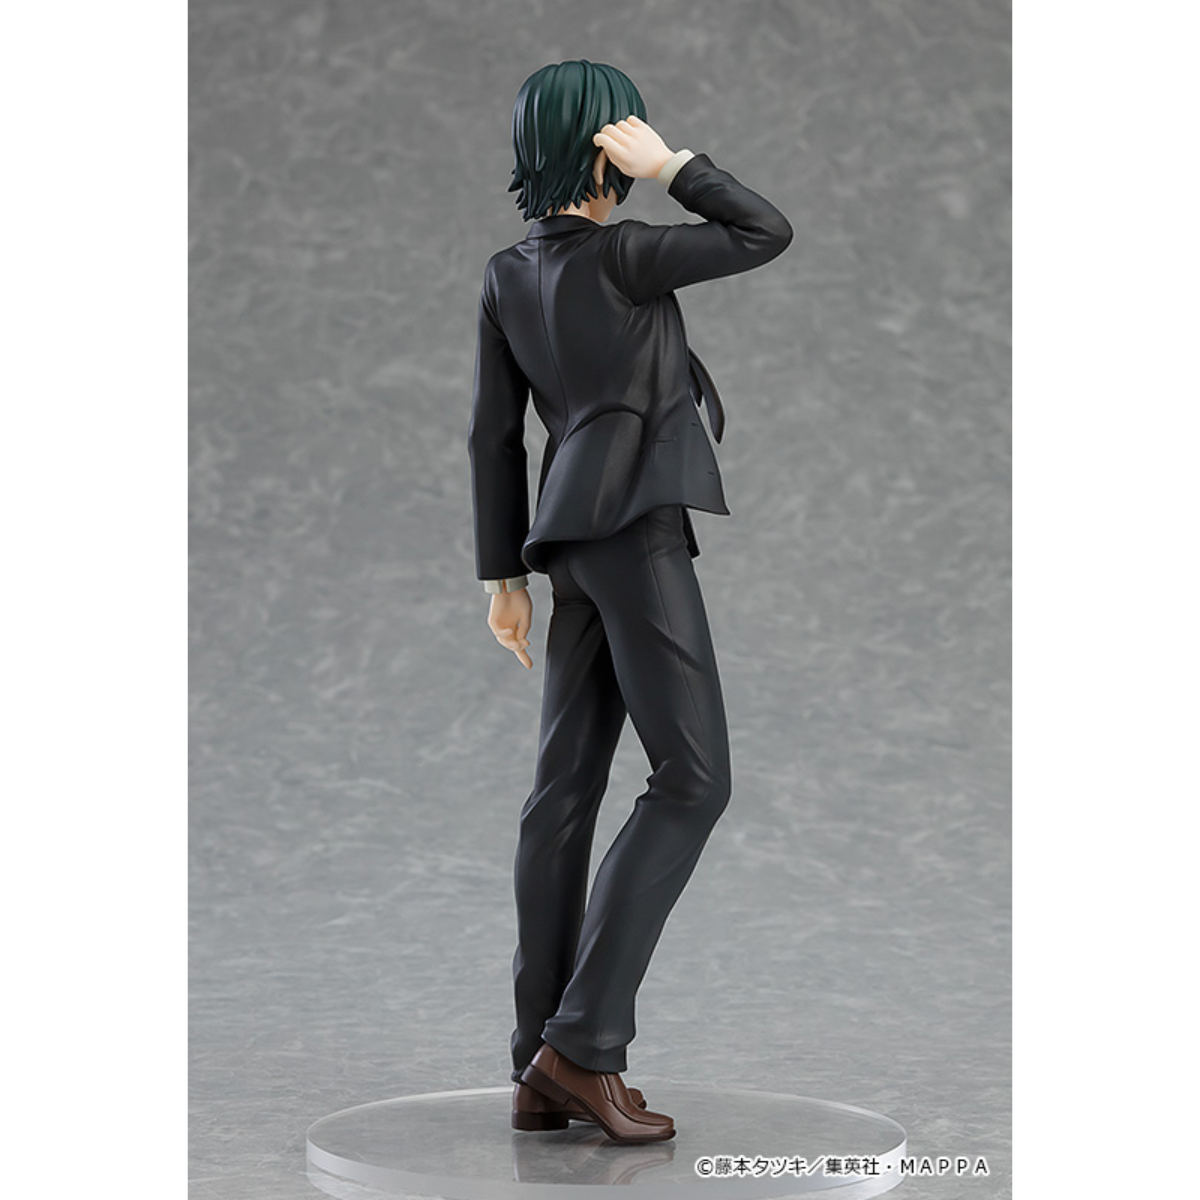 Chainsaw Man Pop Up Parade "Himeno"-Good Smile Company-Ace Cards & Collectibles